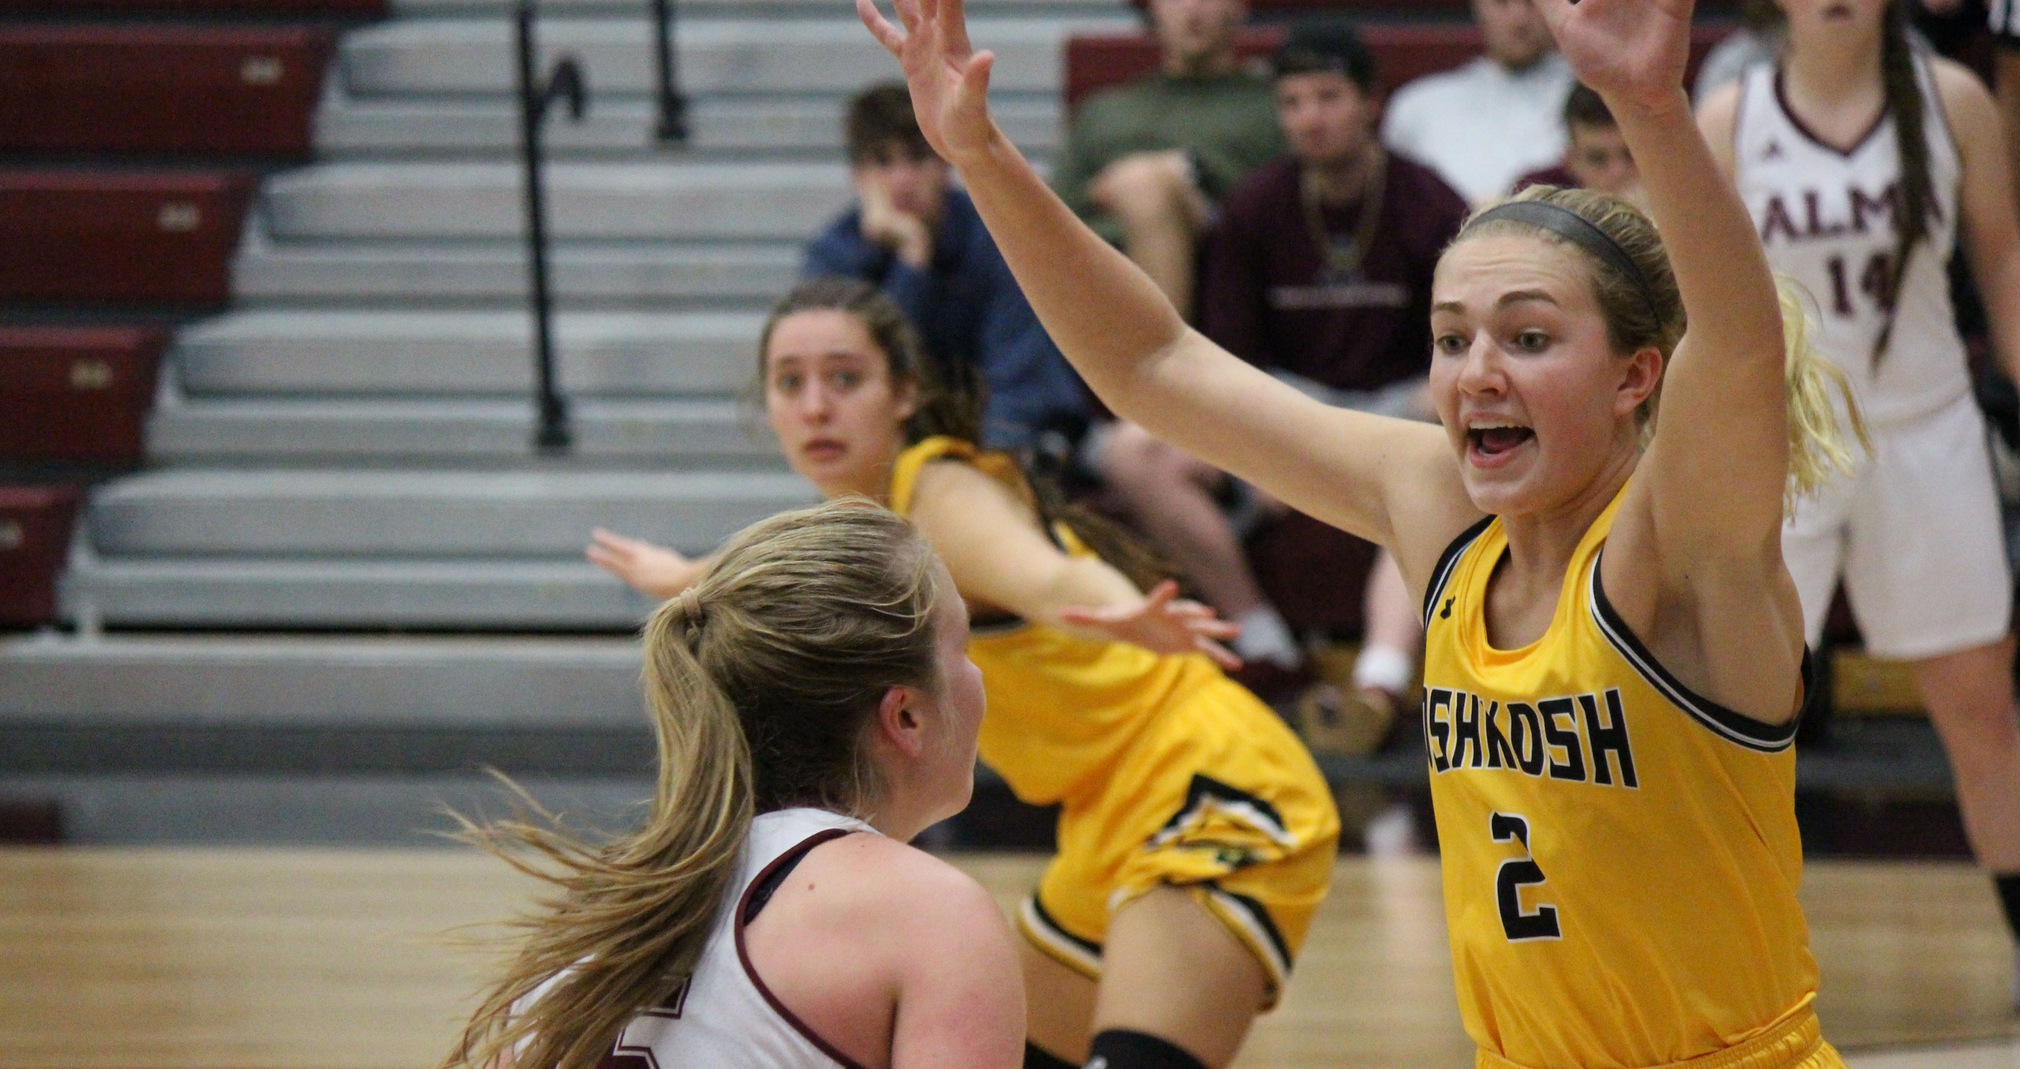 Abby Kaiser (#2) recorded career bests of 11 points and 4 rebounds against Alma College.